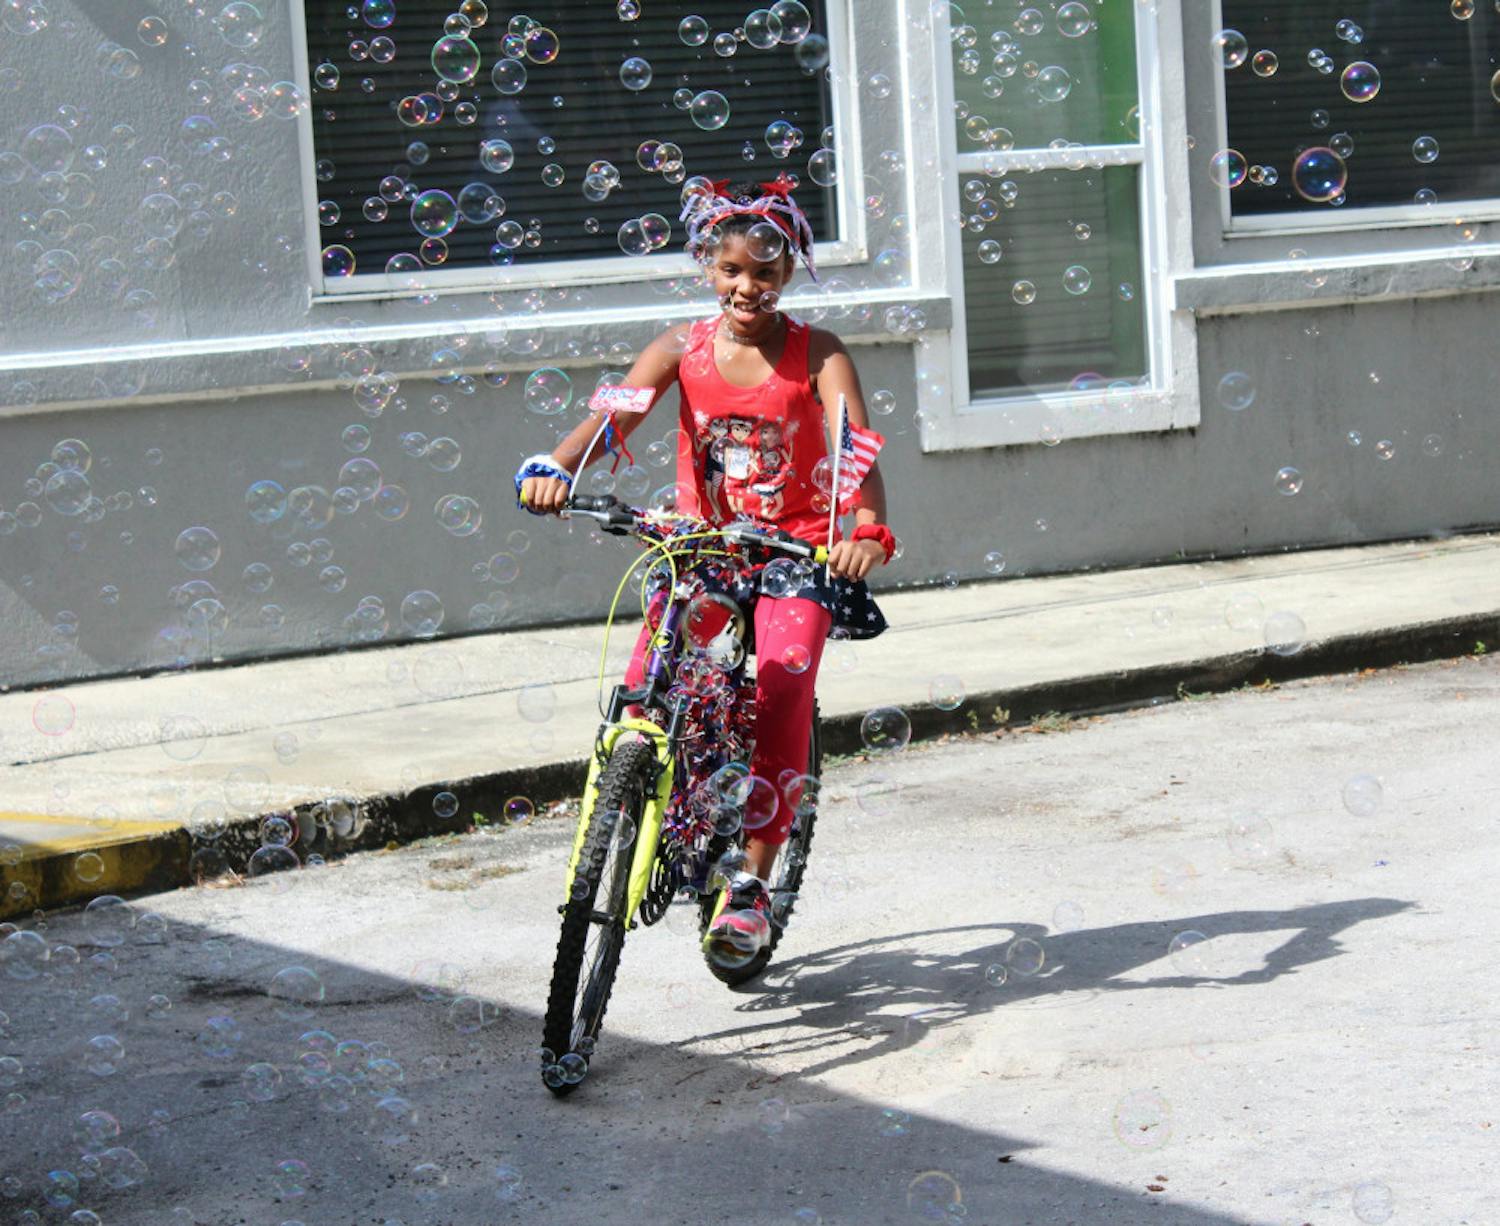 Bouncers held its second annual Fourth of July Bicycle Parade with a turnout of less than a tenth of what it was in 2019.
A year prior, 100 kids attended. This year, only eight came to ride their bicycles, tricycles, and scooters around the parking lot. Angie Adams, manager of Bouncers Indoor Playground, attributed the reduced turnout to the pandemic but proceeded with the event because she says “It’s still important to celebrate the Fourth of July.”